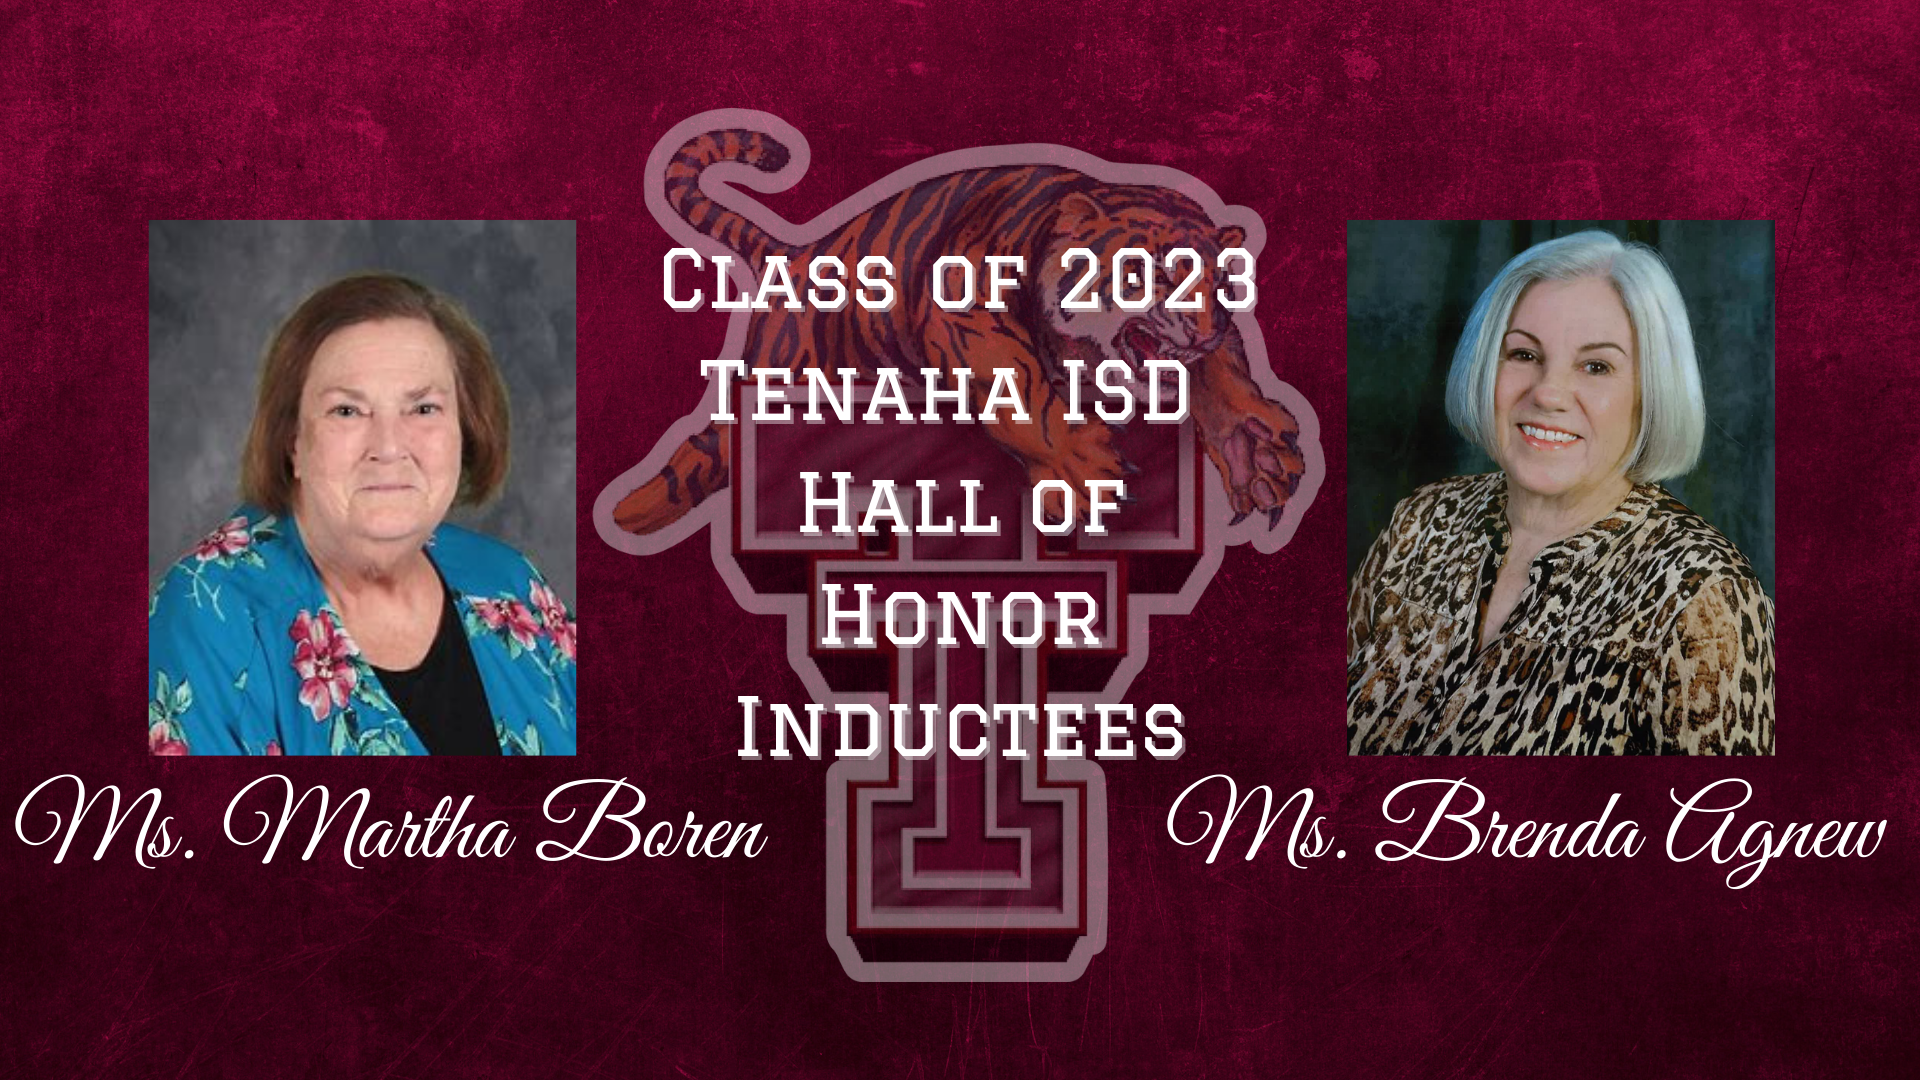 Tenaha ISD Homecoming Schedule and Hall of Honor Inductees